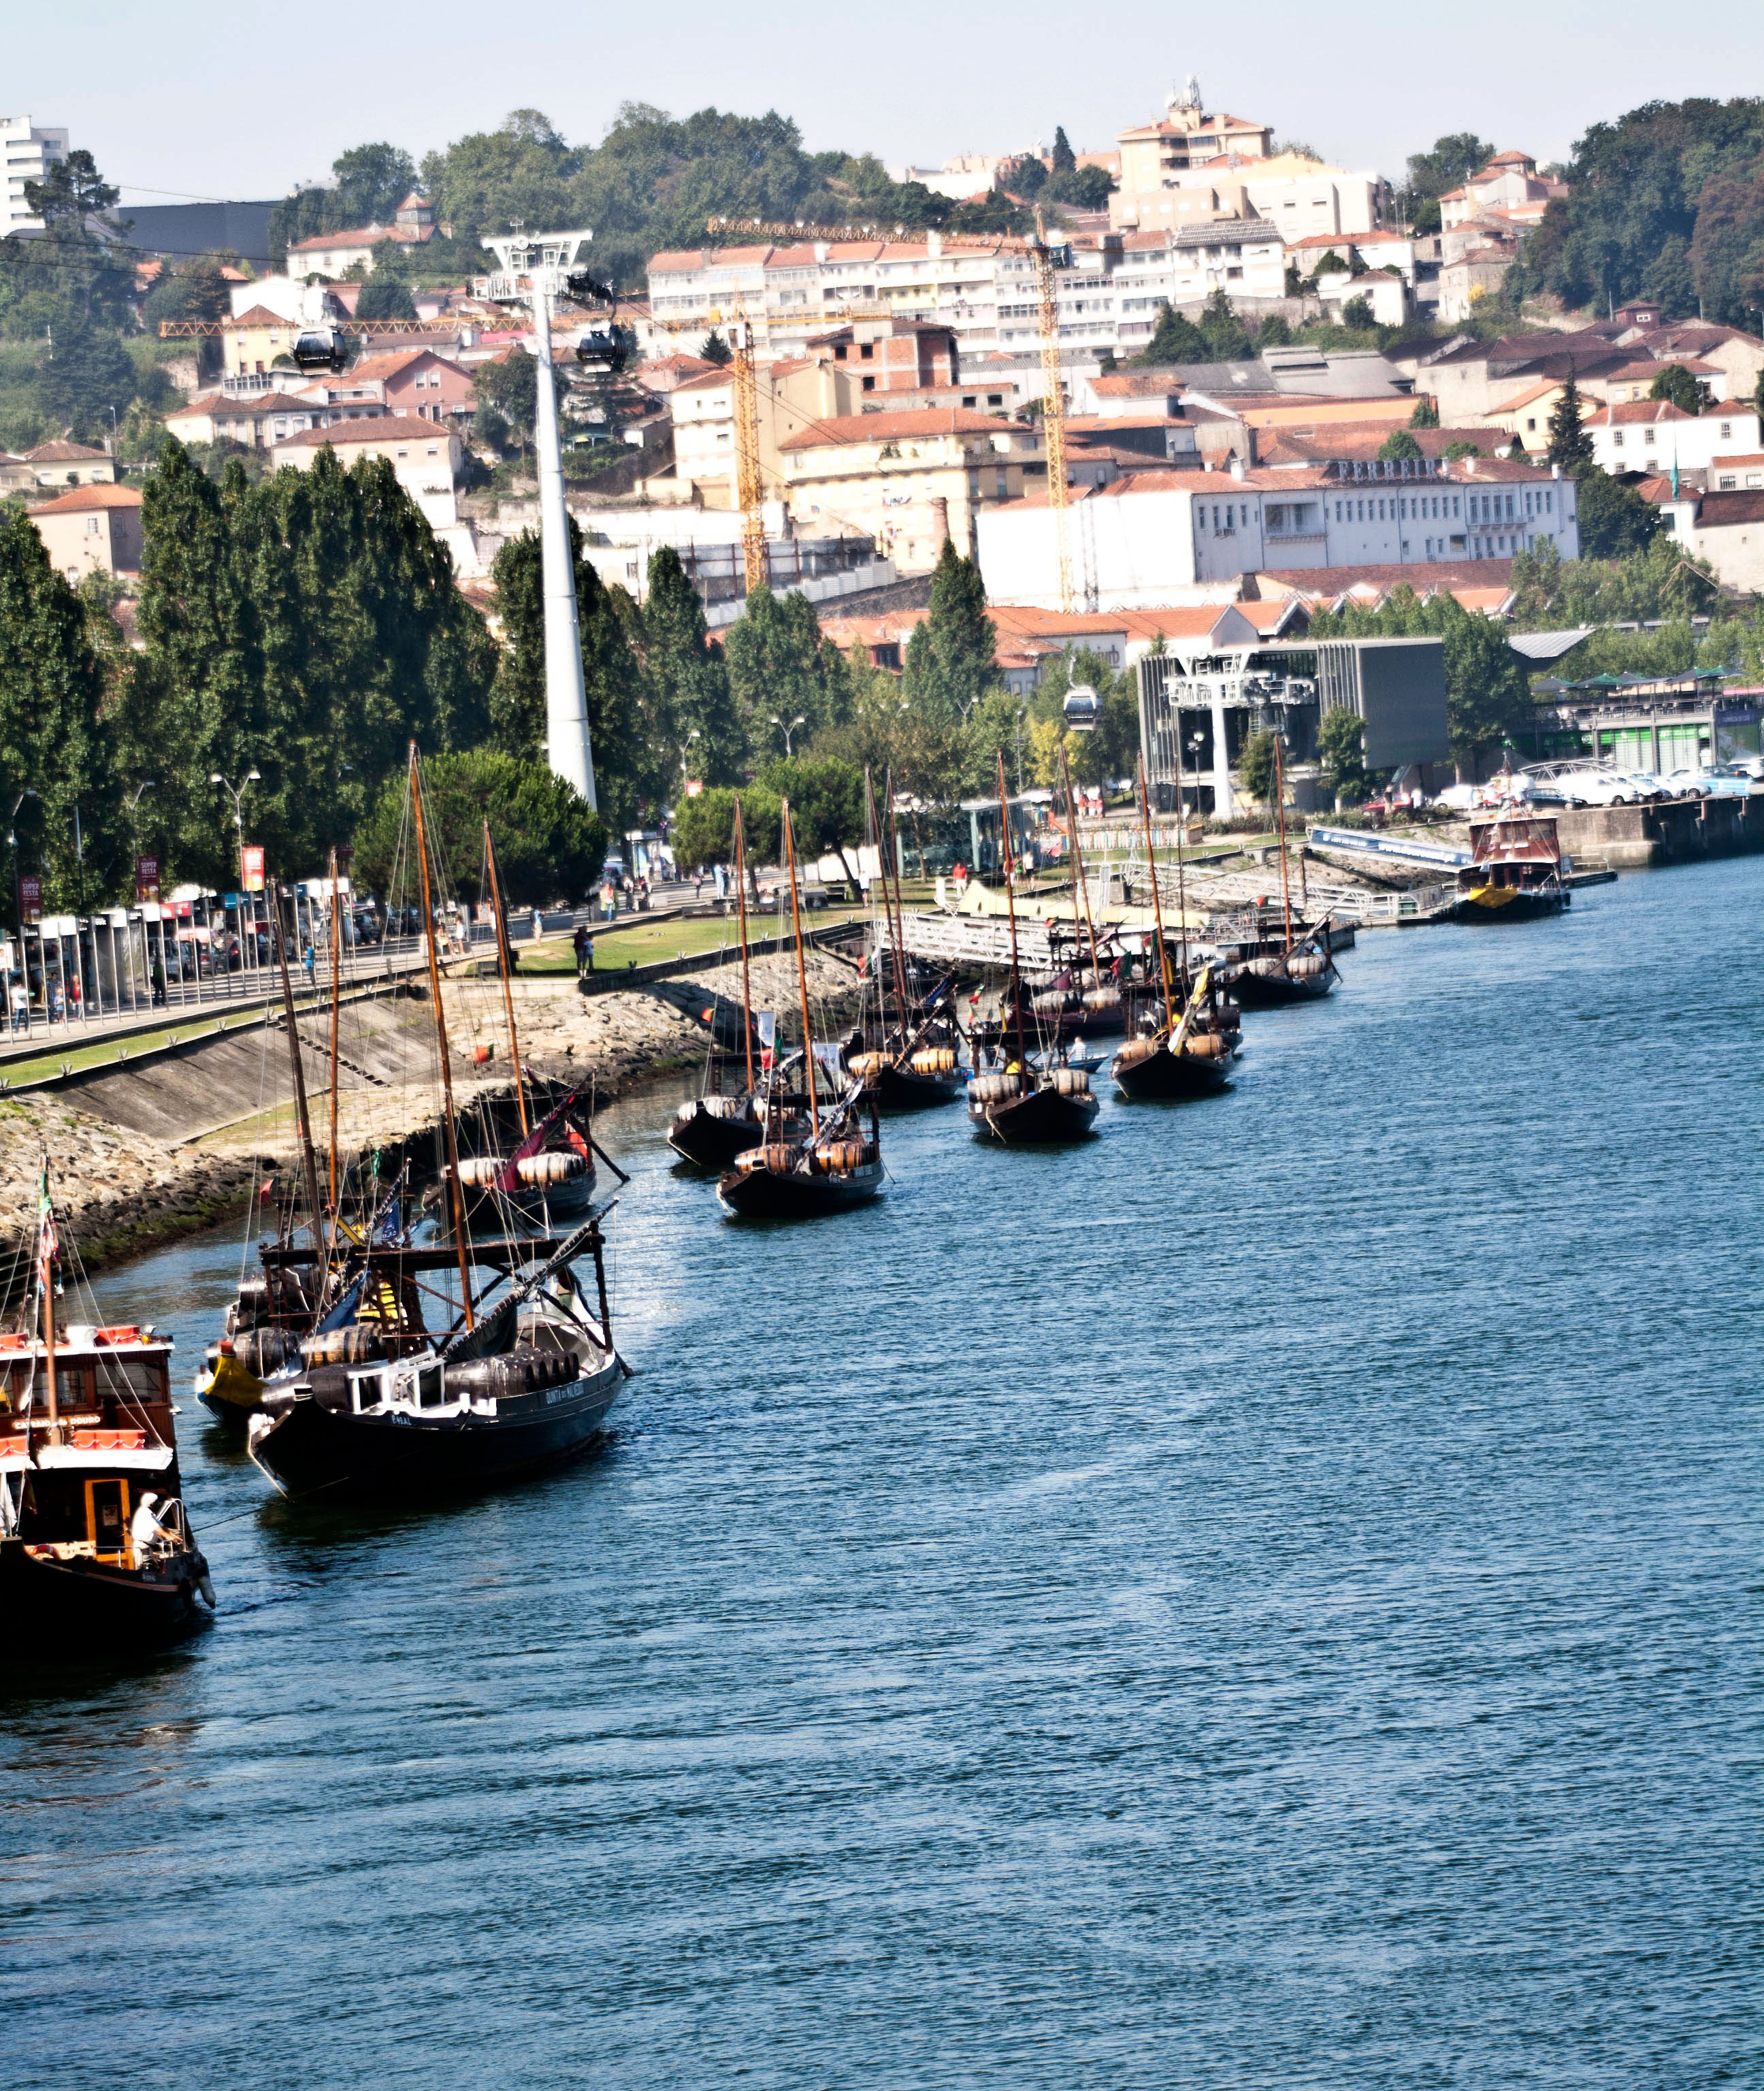 Porto, Portugal Photography Project